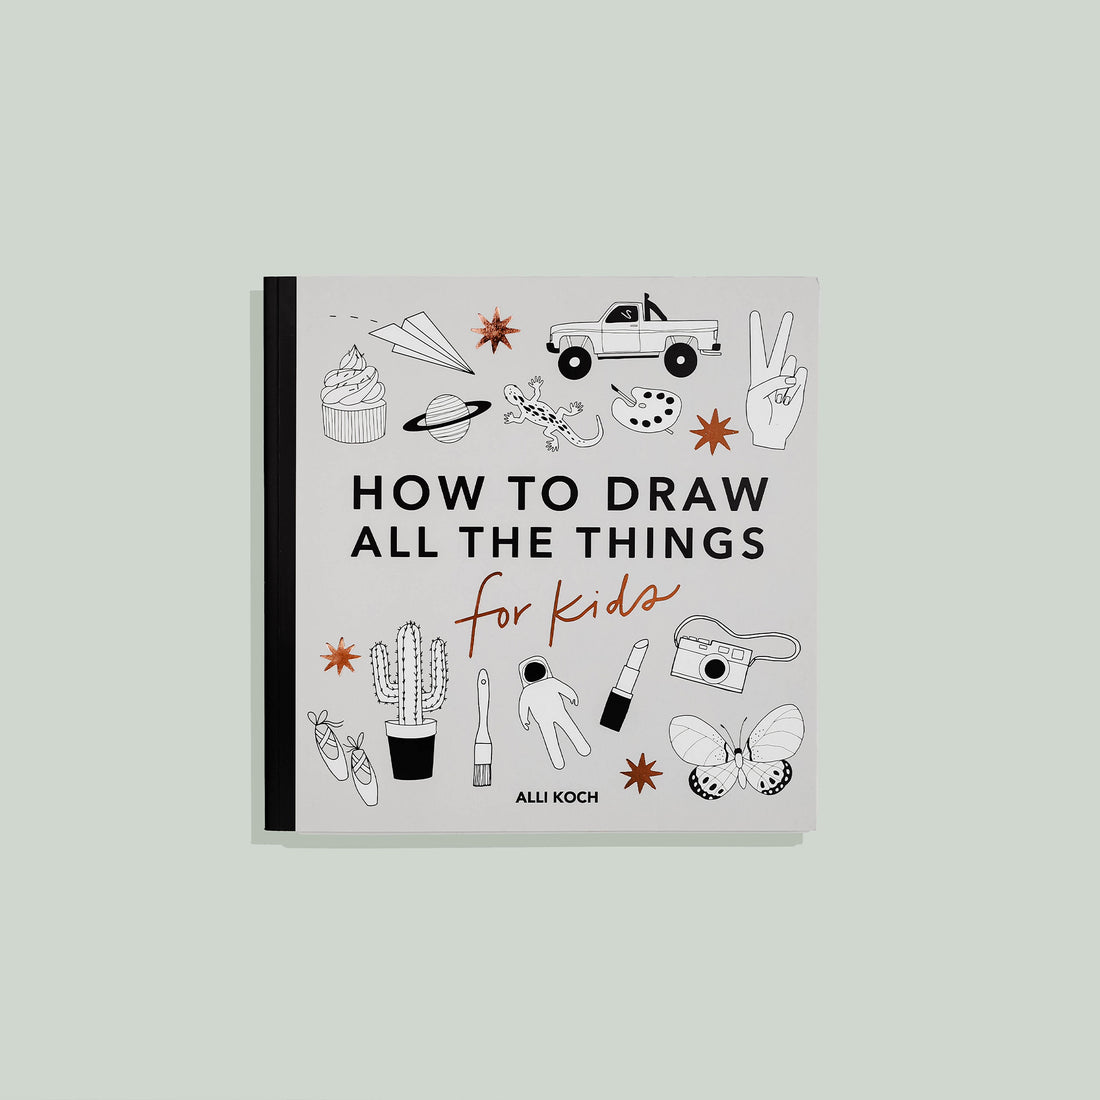 All the Things: How To Draw Book For Kids – Paige Tate and Co.